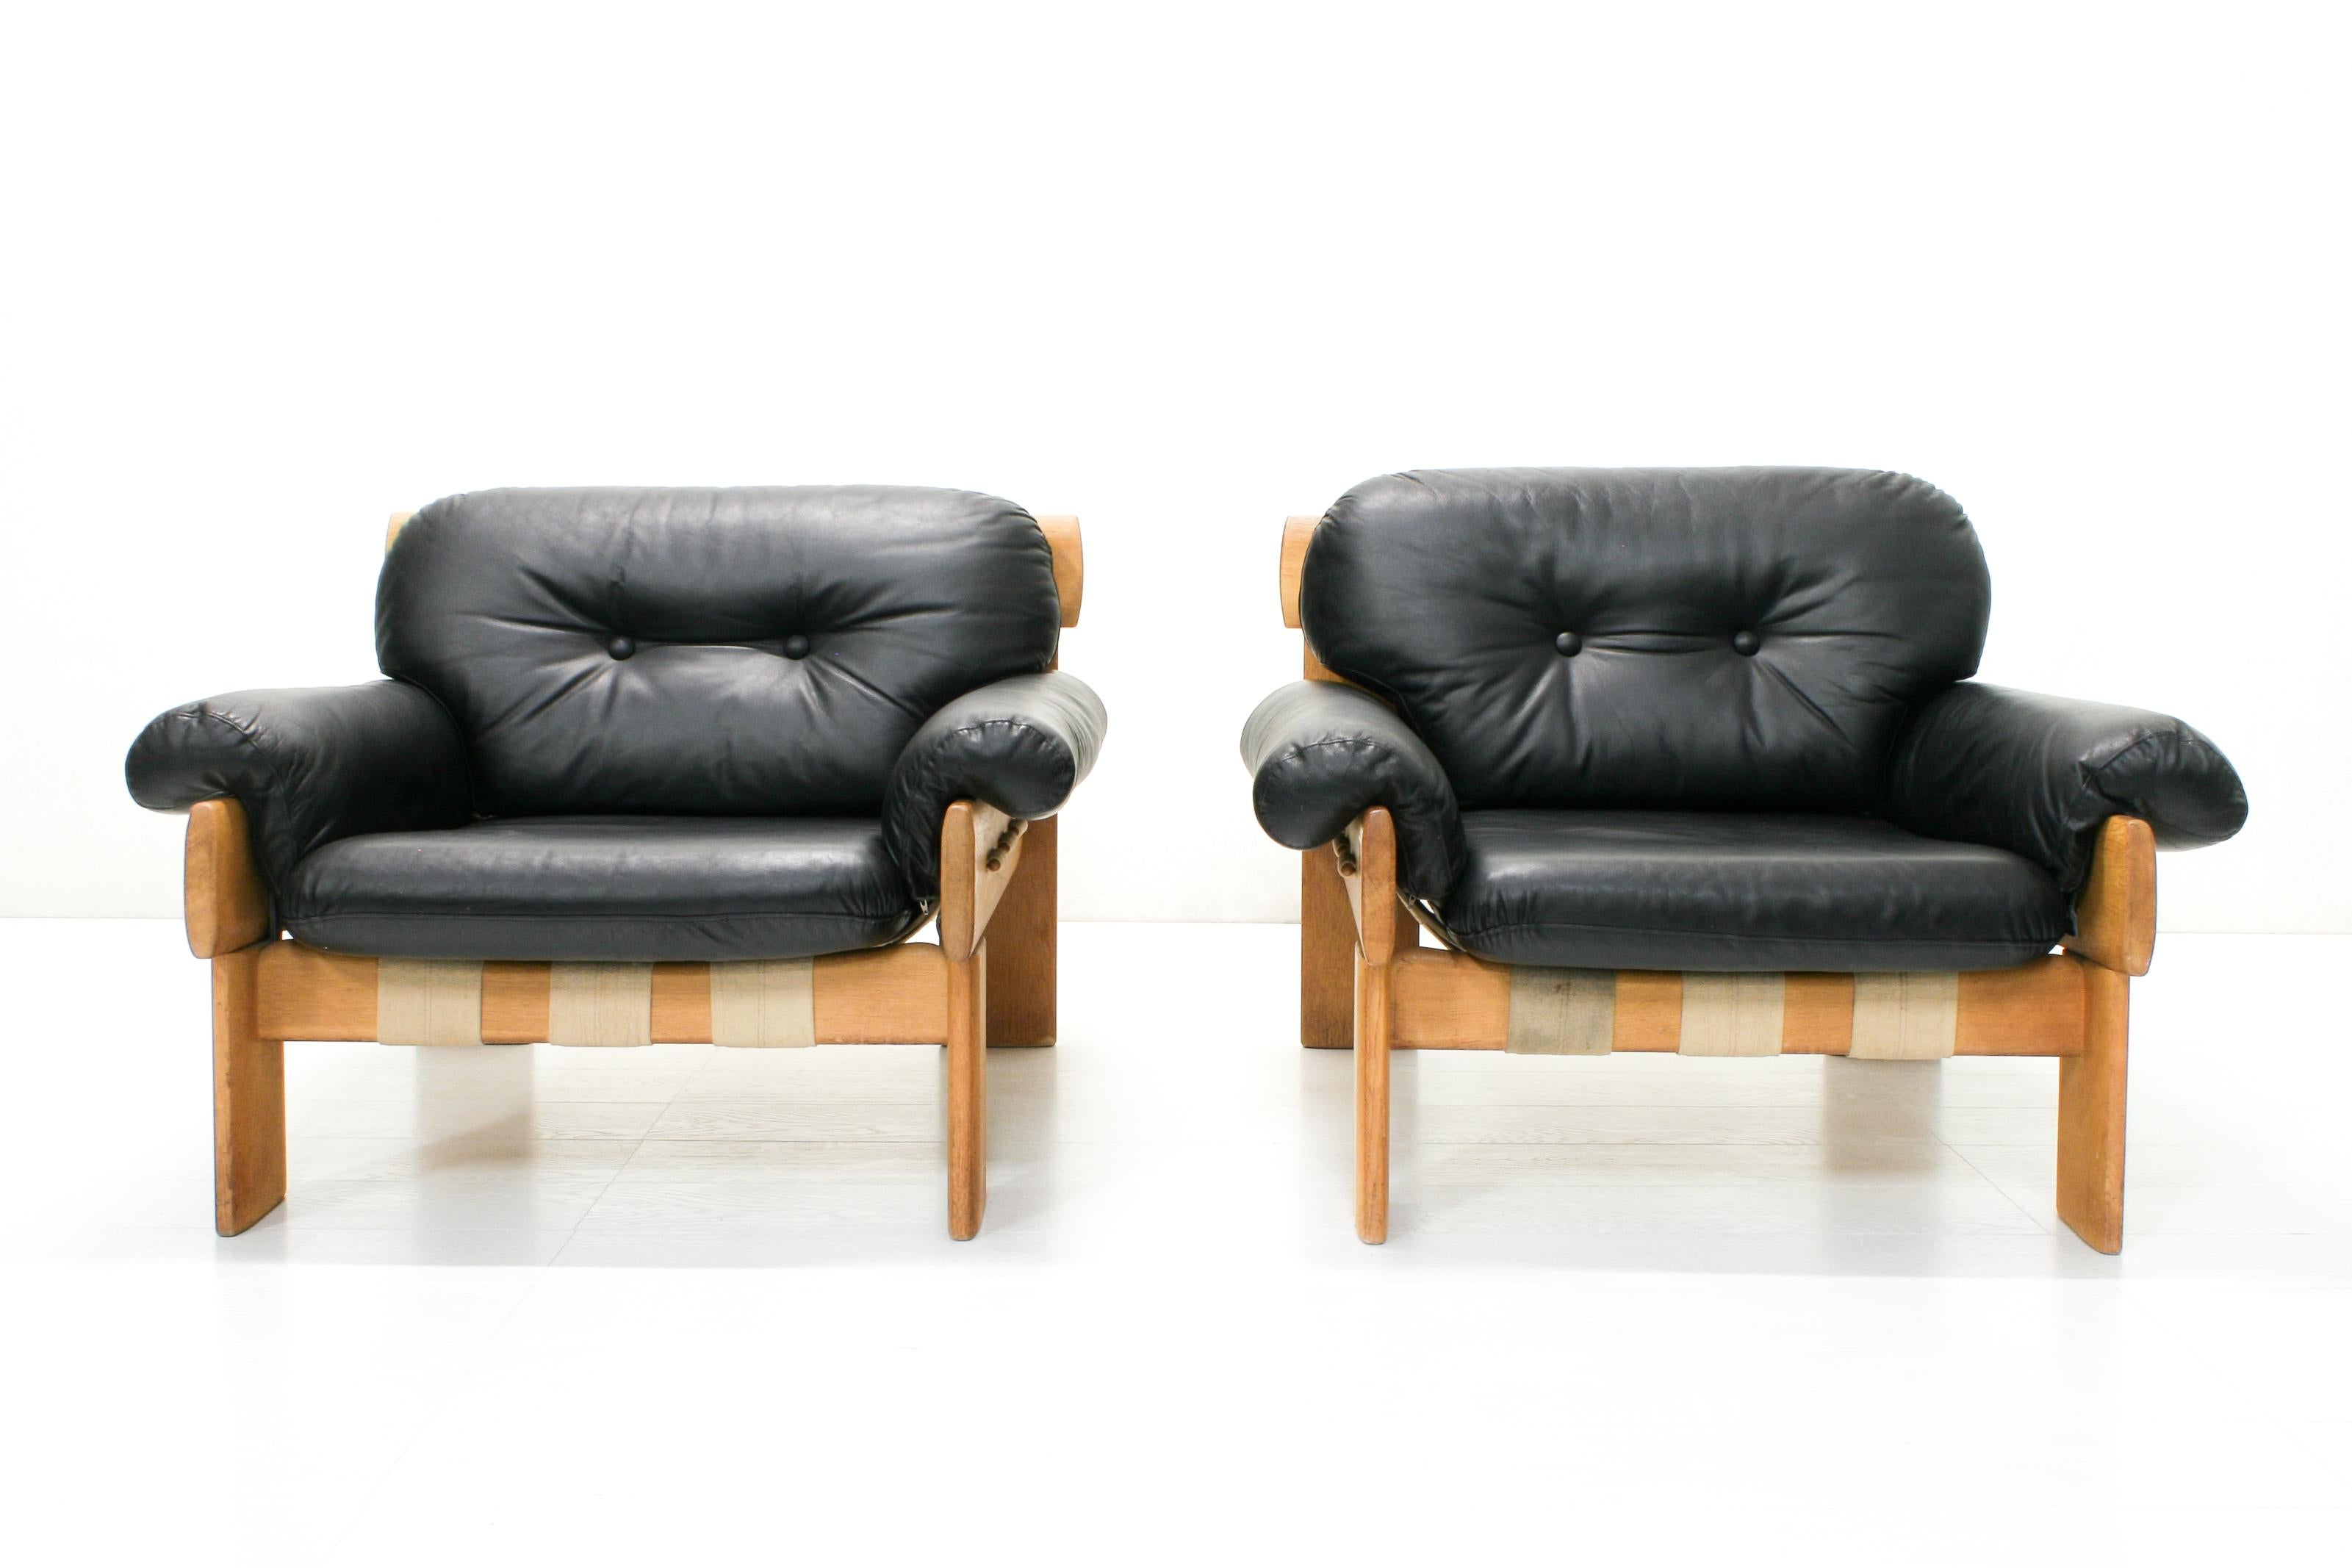 Oak and Leather Africa Armchairs and Sofa by Esko Pajamies for Asko Oy, 1970s For Sale 6